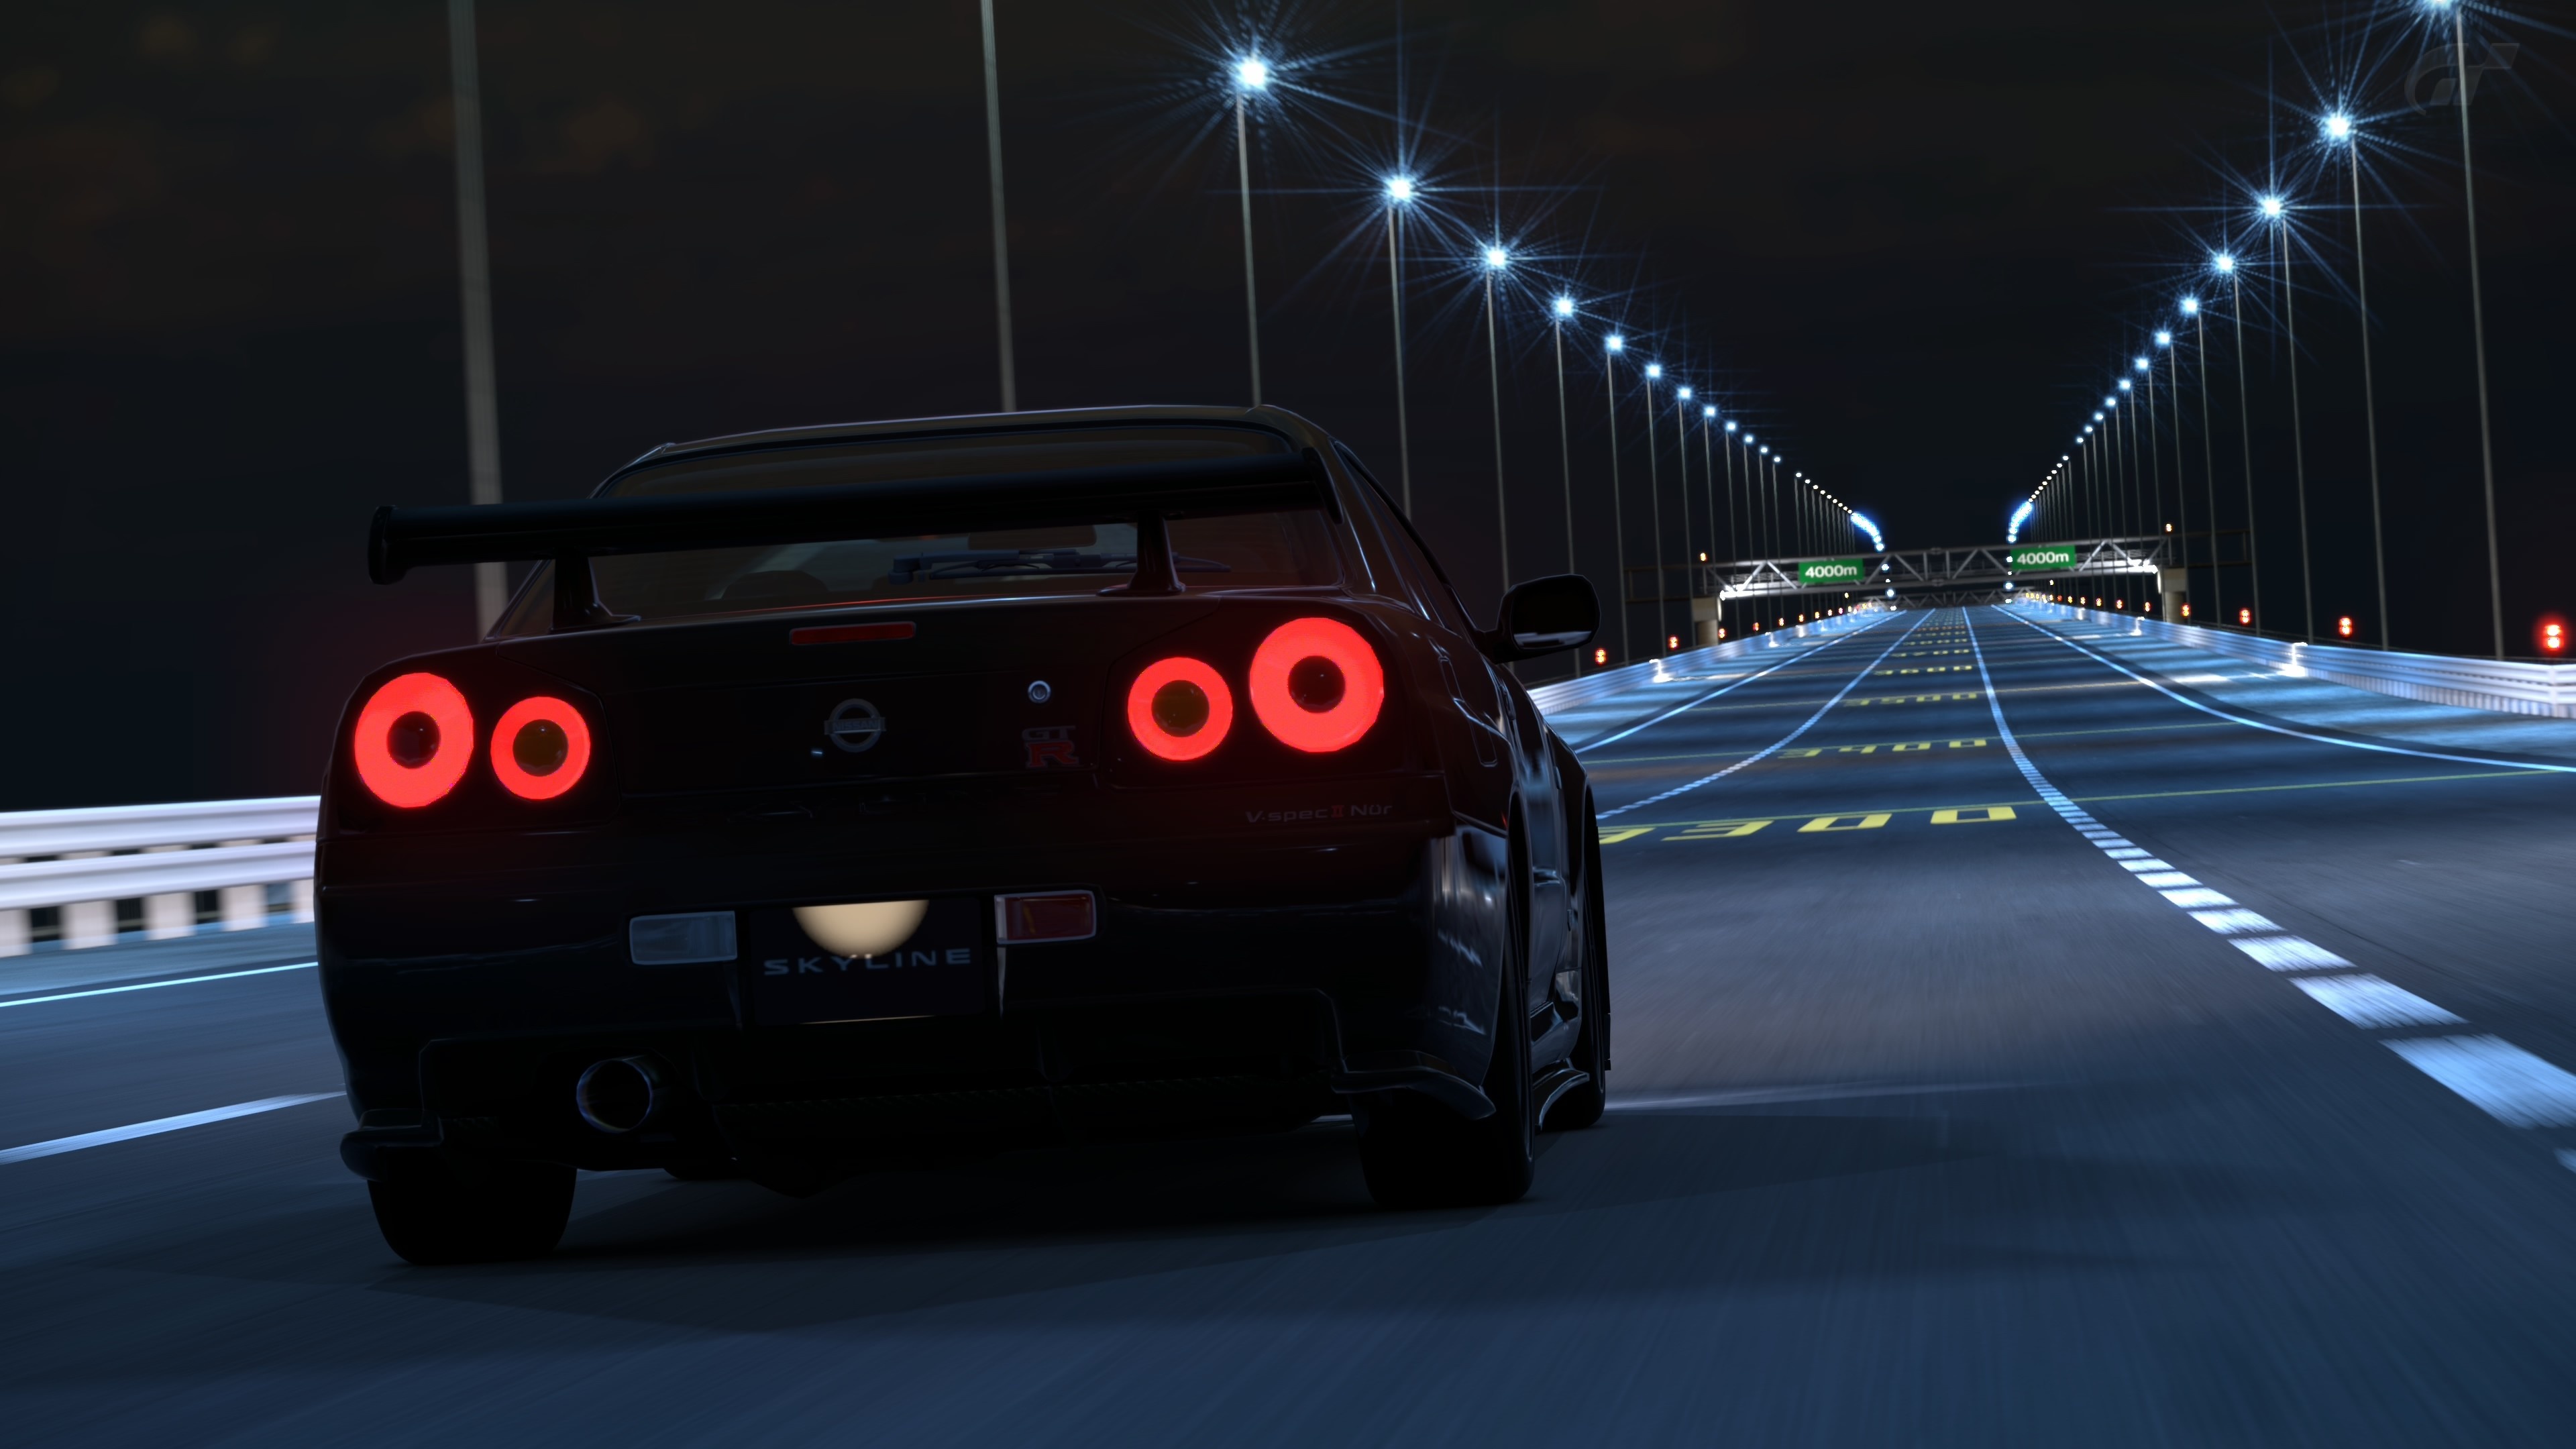 Fast and Furious, R34 Skyline wallpapers, Ryan Anderson's collection, Dream car, 3840x2160 4K Desktop